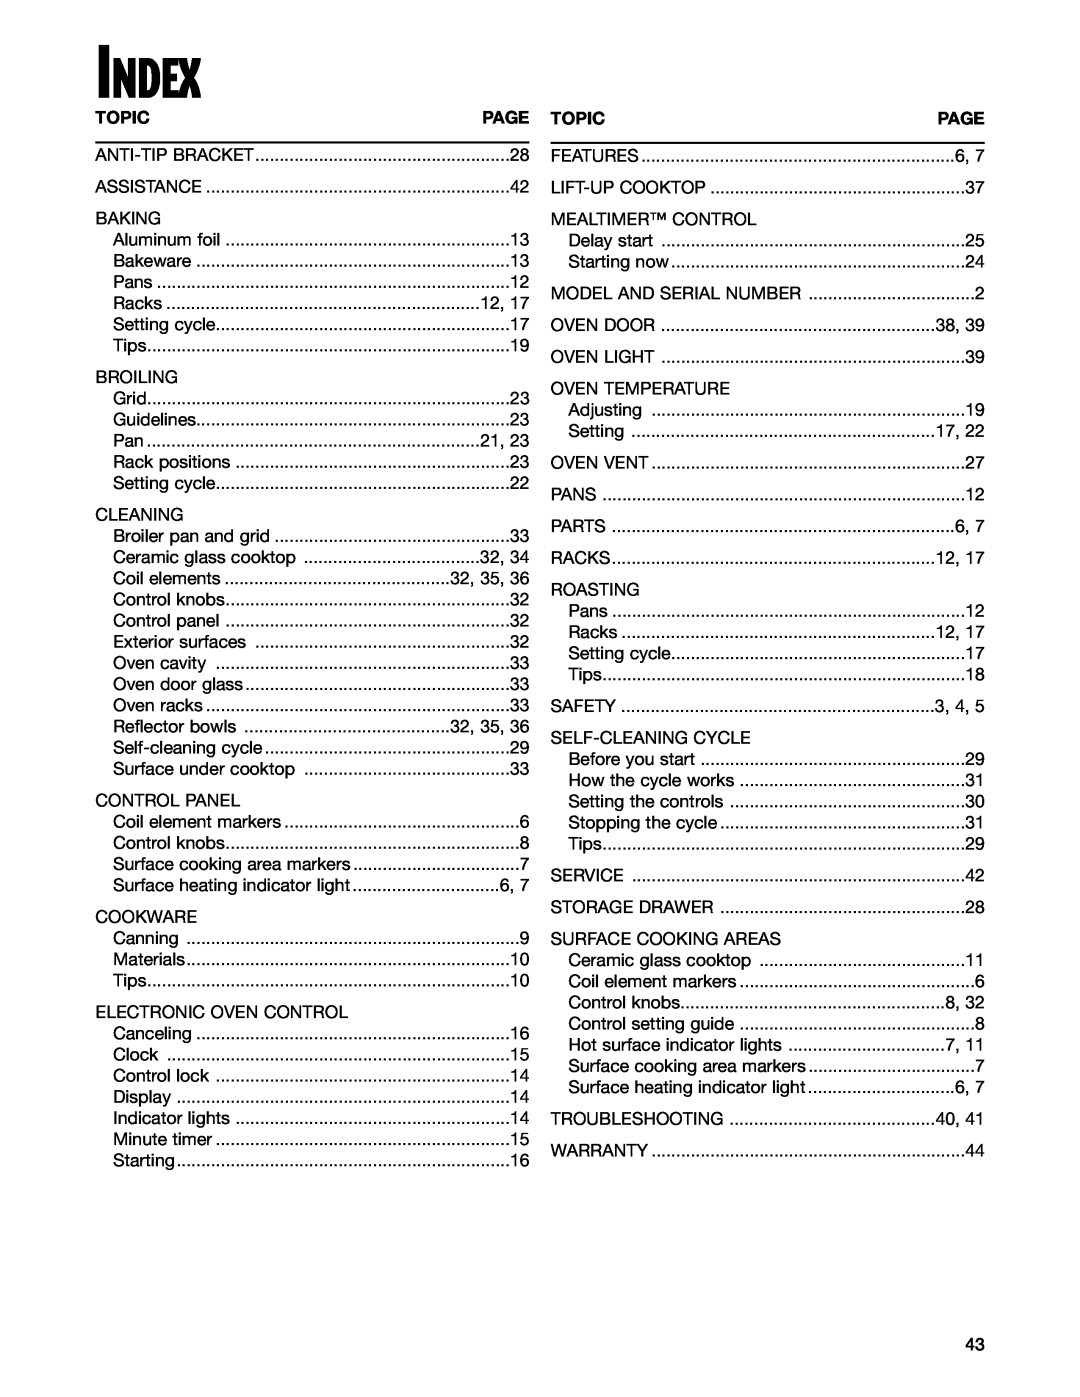 Whirlpool RF378PXG, RF377PXG manual Index, Topic, Page 